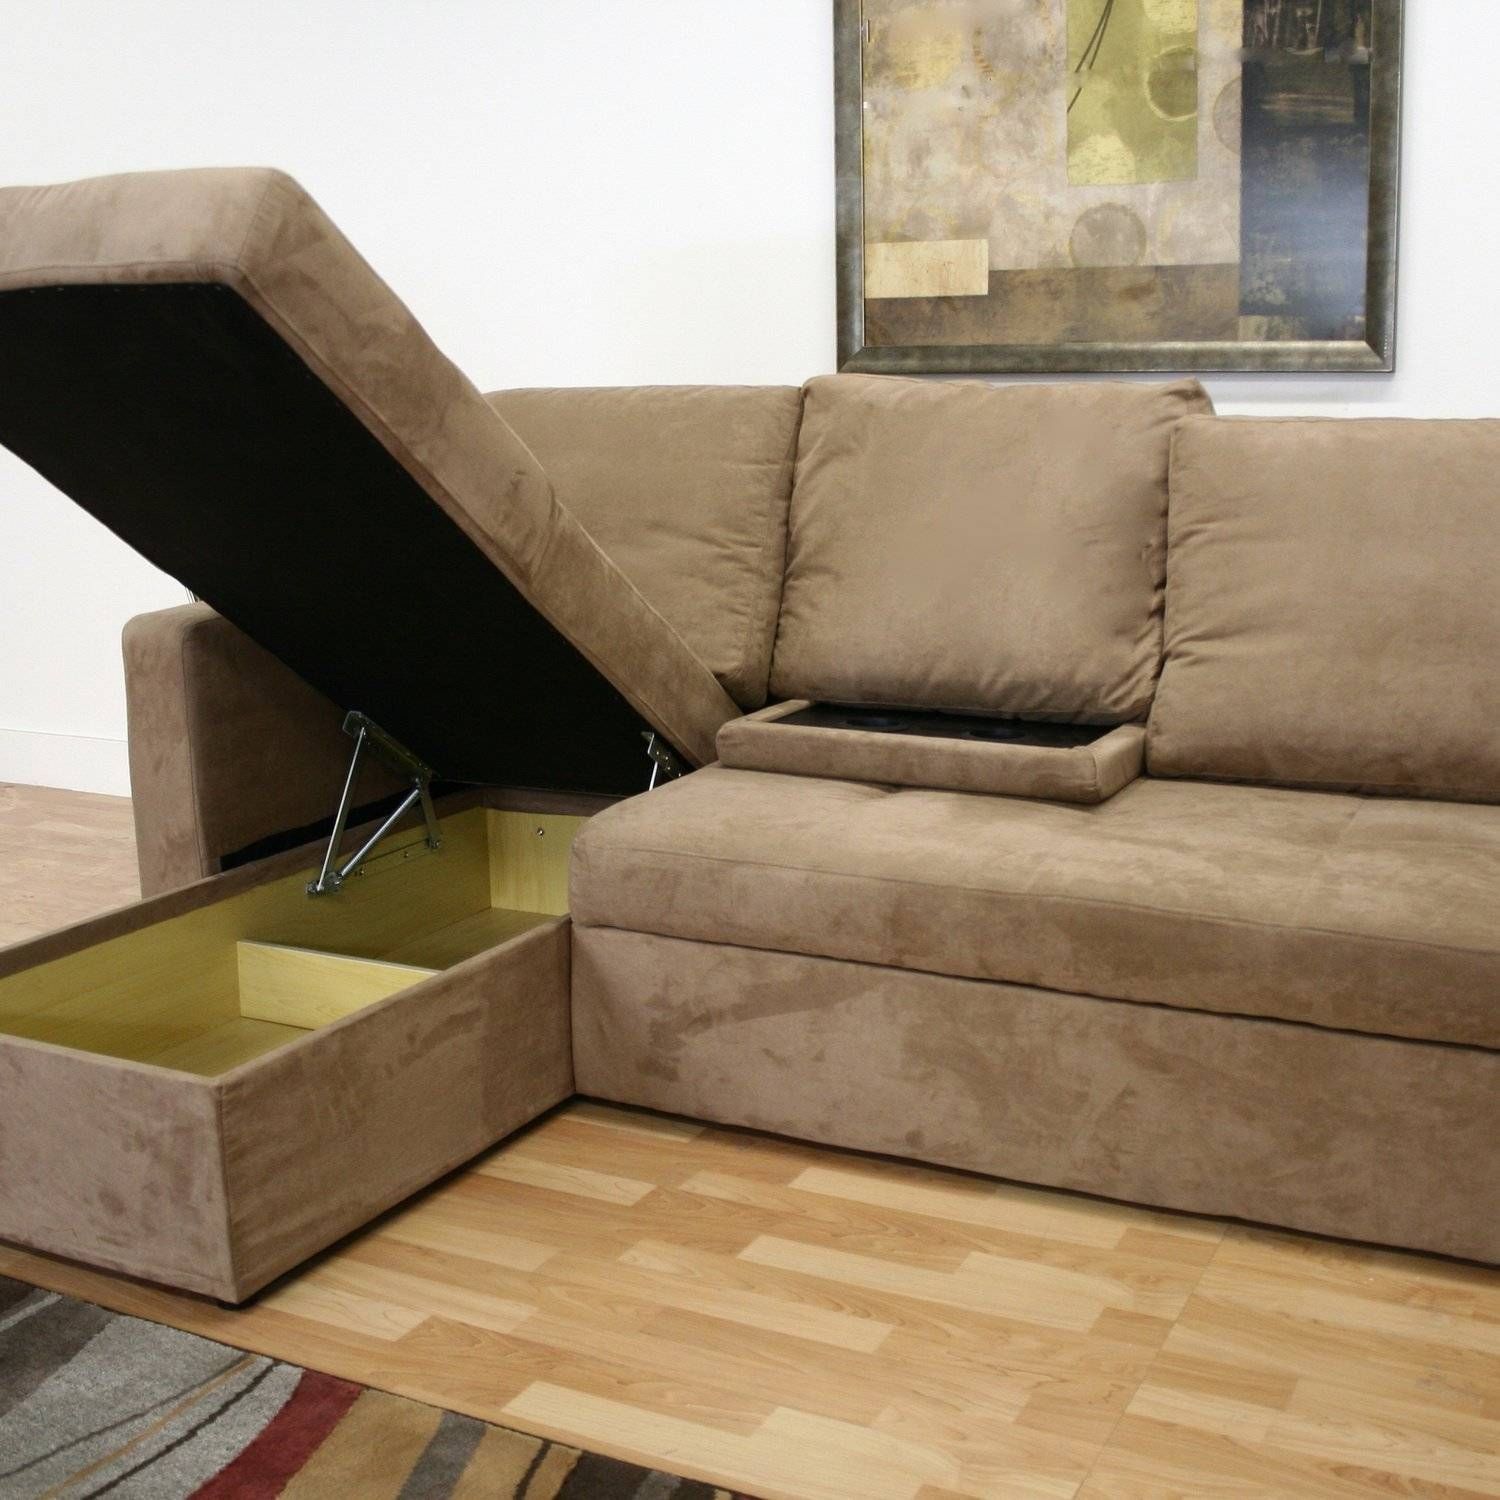 Fashionable Sectional Sofa Design Model With Brown Genuine Leather With Sofas With Chaise Longue (View 20 of 30)